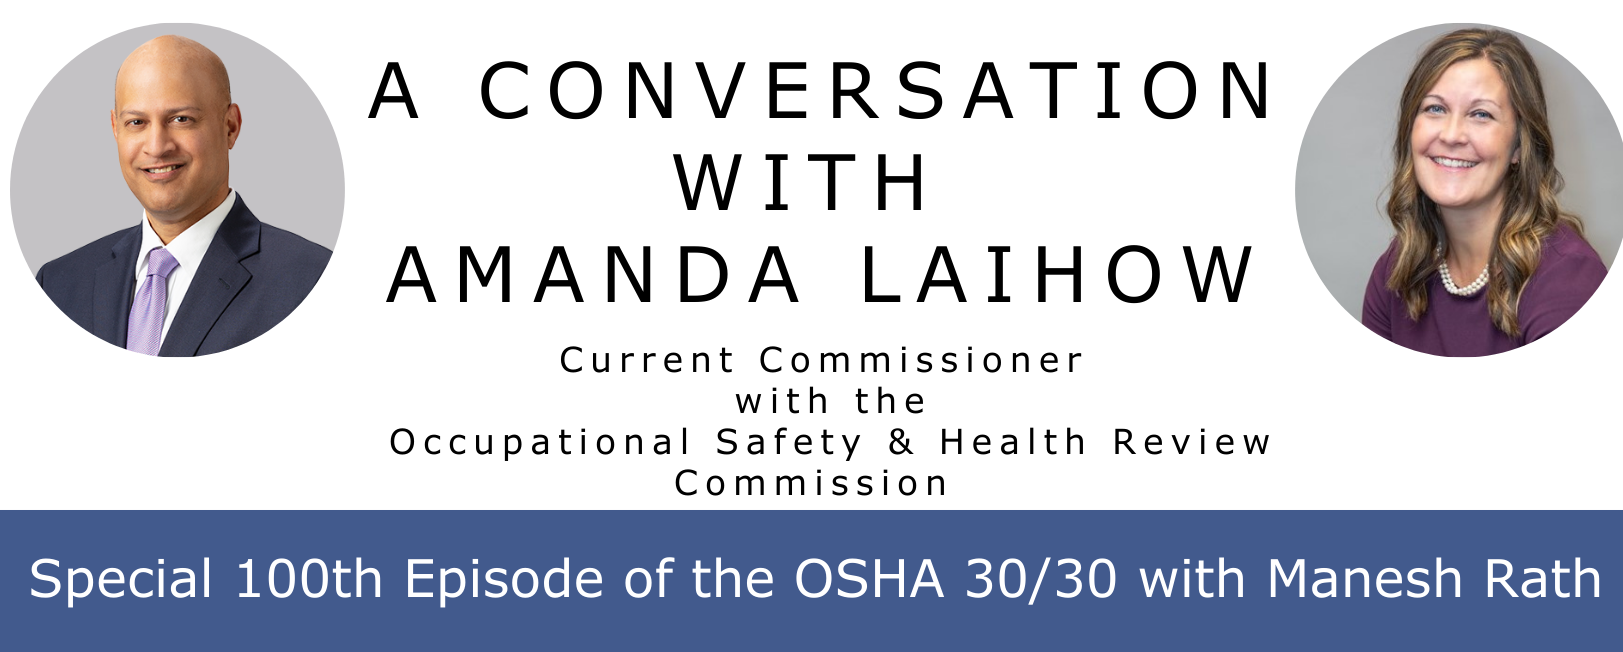 A Conversation with Amanda Laihow. Special 100th Episode of OSHA 30/30 with Manesh Rath